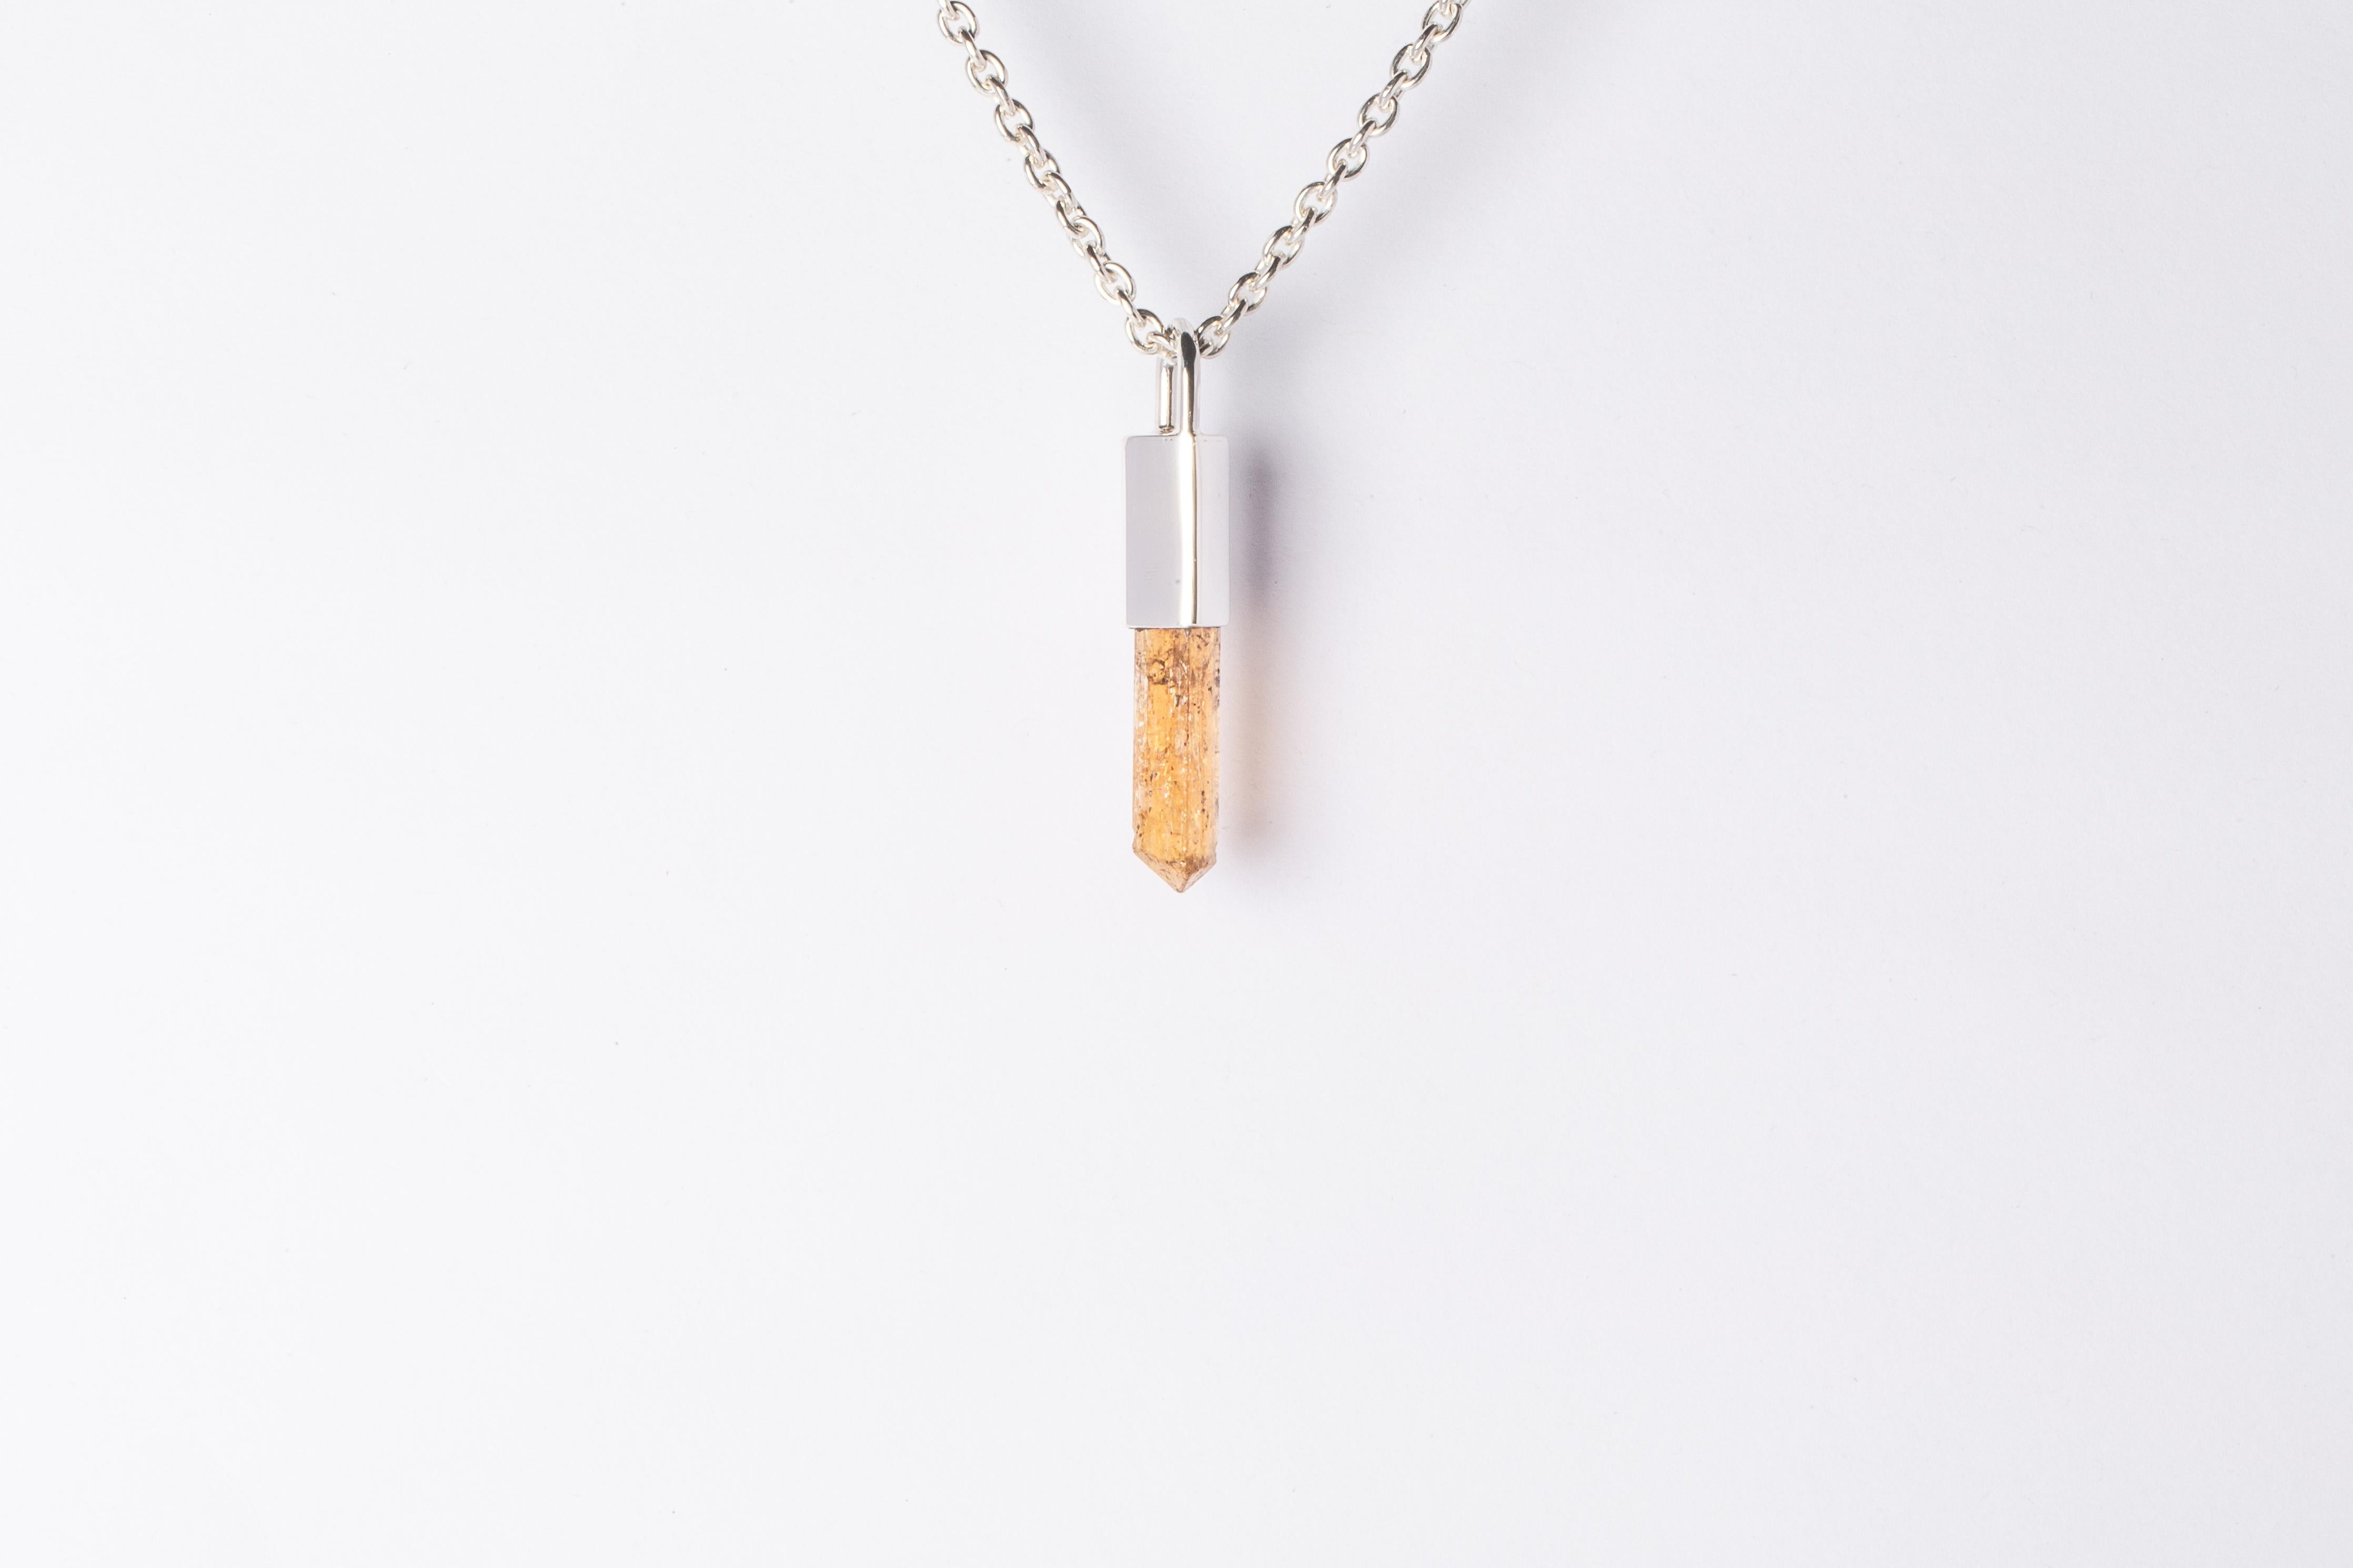 Necklace in polished sterling silver and a rough of imperial topaz. It comes on 74 cm sterling silver chain. 
The Talisman series is an exploration into the power of natural crystals. Tools for Magic. The crystals used in these pieces are discovered